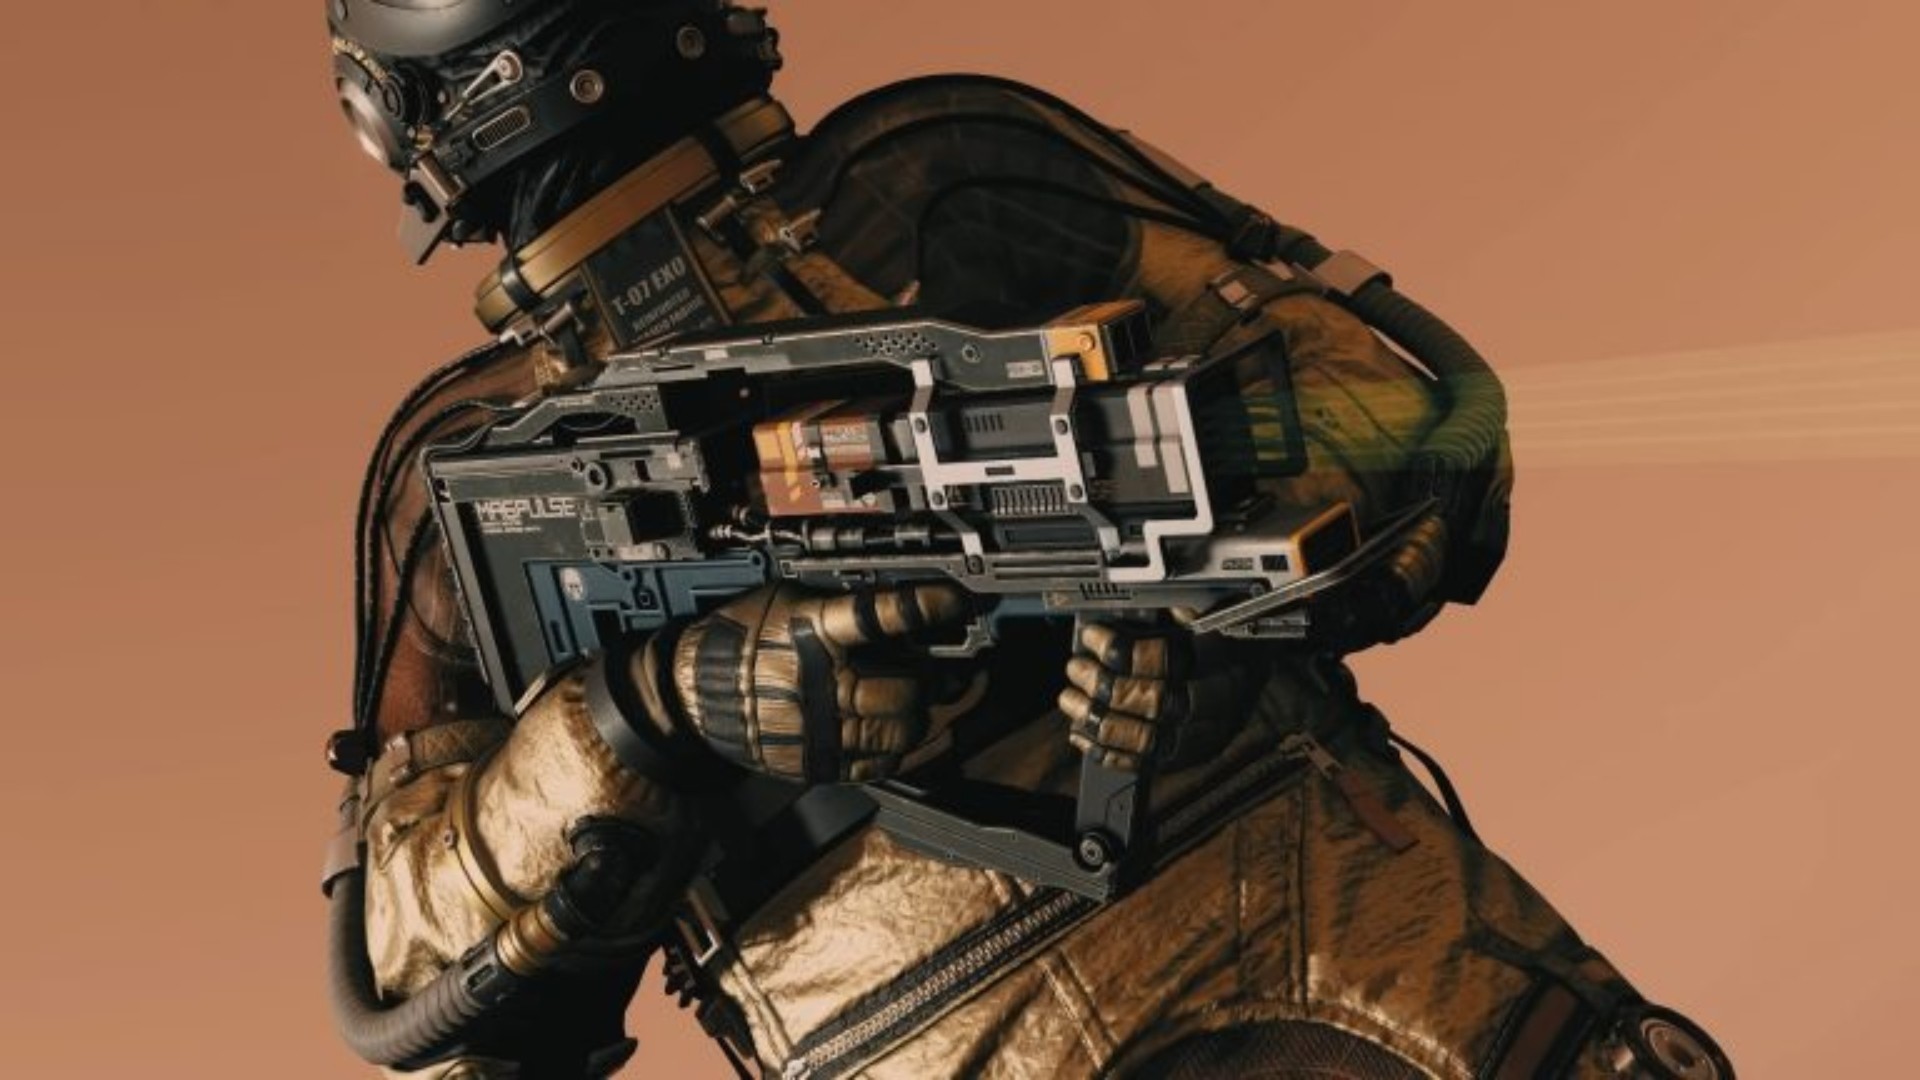 Starfield mag pulse gun: A soldier aims a heavy weapon in Bethesda RPG game Starfield